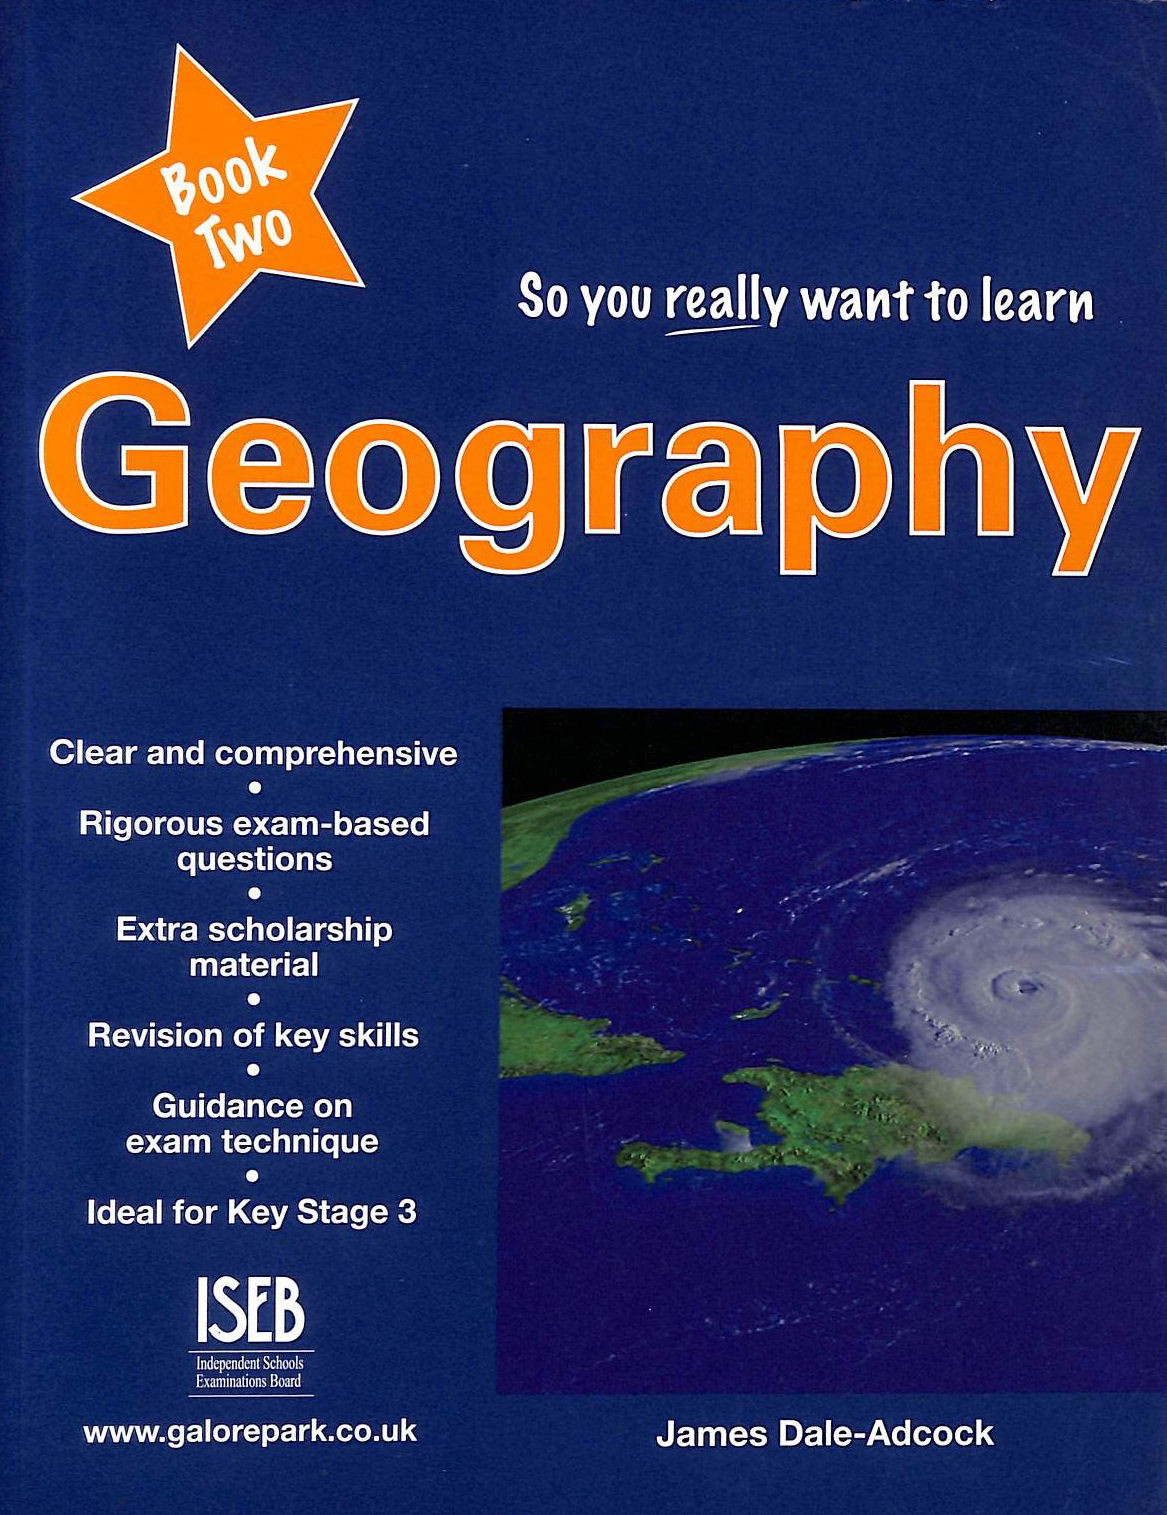 JAMES DALE-ADCOCK - So You Really Want To Learn Geography Book 2: A Textbook For Key Stage 3 And Common Entrance